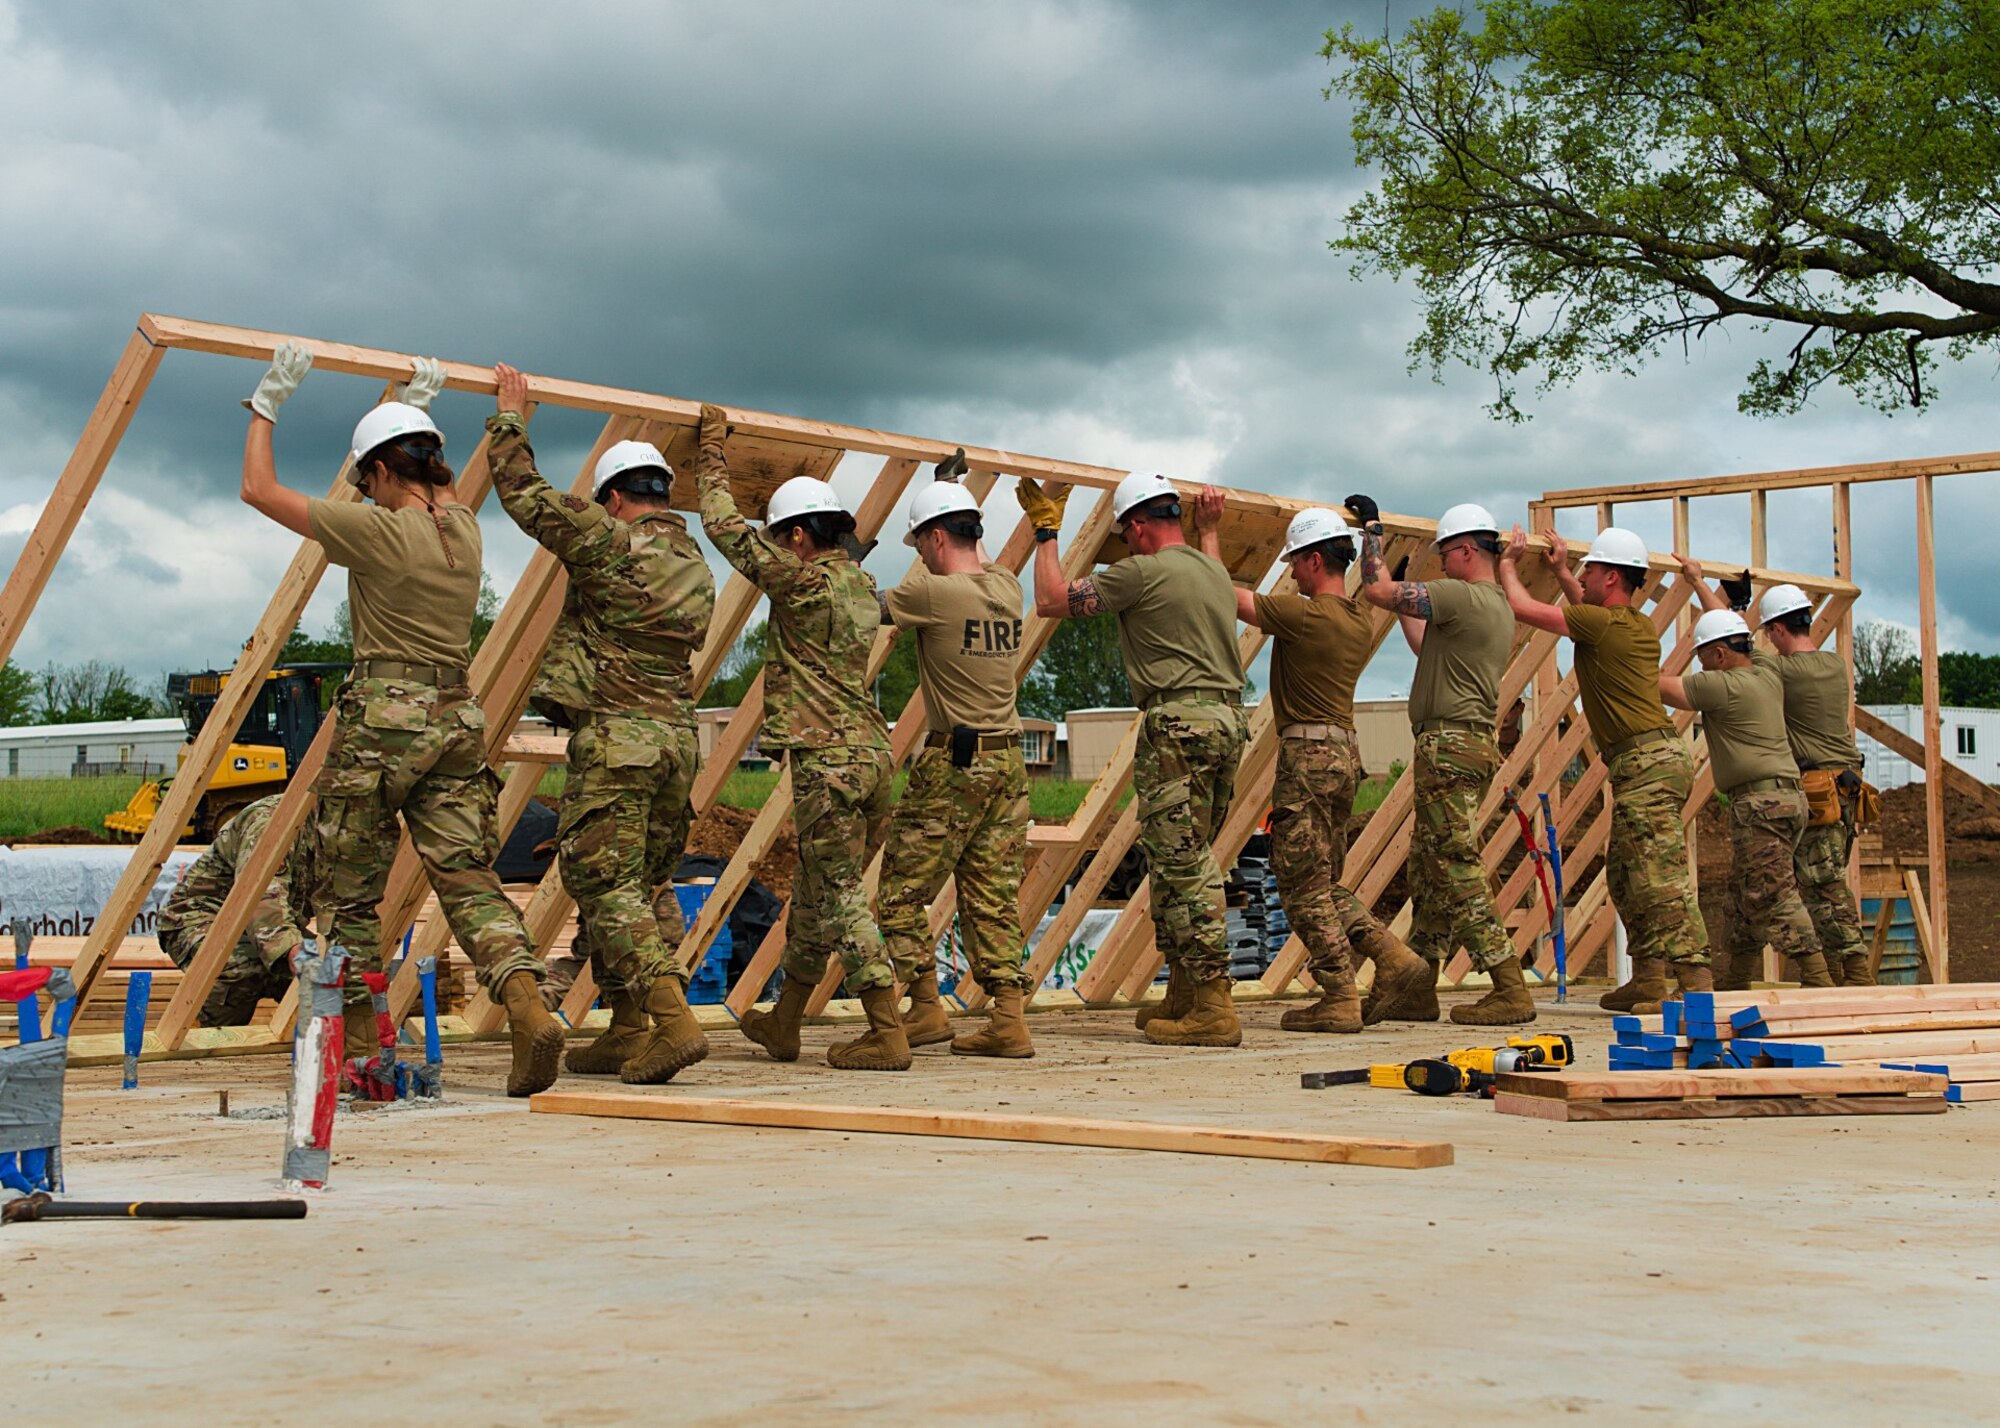 Airmen from all trades, with the 176th Wing’s Civil Engineer Squadron, raise the second exterior wall in unison as they construct the first home in the Cherokee Veterans Housing Initiative in Tahlequah, Oklahoma, May 18, 2021. The initiative is a collaboration between the Department of Defense’s Innovative Readiness Training program and the Cherokee Nation that constructs new single-family homes and supporting infrastructure for eligible Cherokee Nation veterans and their families. (U.S. Air Guard photo by Staff Sgt. Clay Cook)